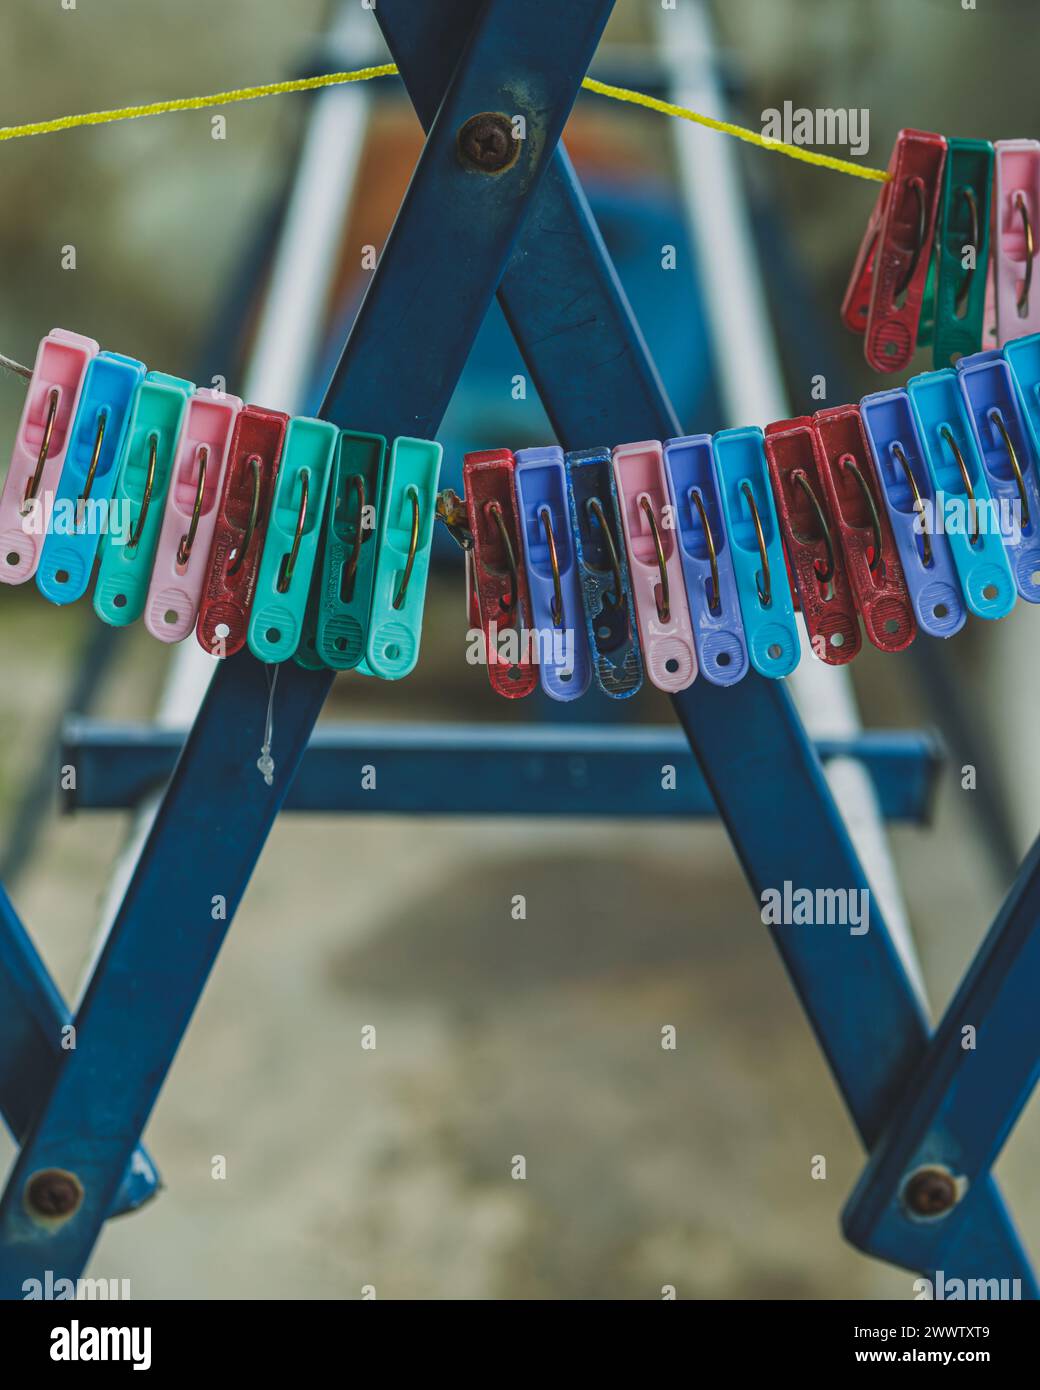 A row of mix old and new clothespins in various color hangs from a taut clothesline. This image is perfect for illustrating laundry day, spring cleani Stock Photo